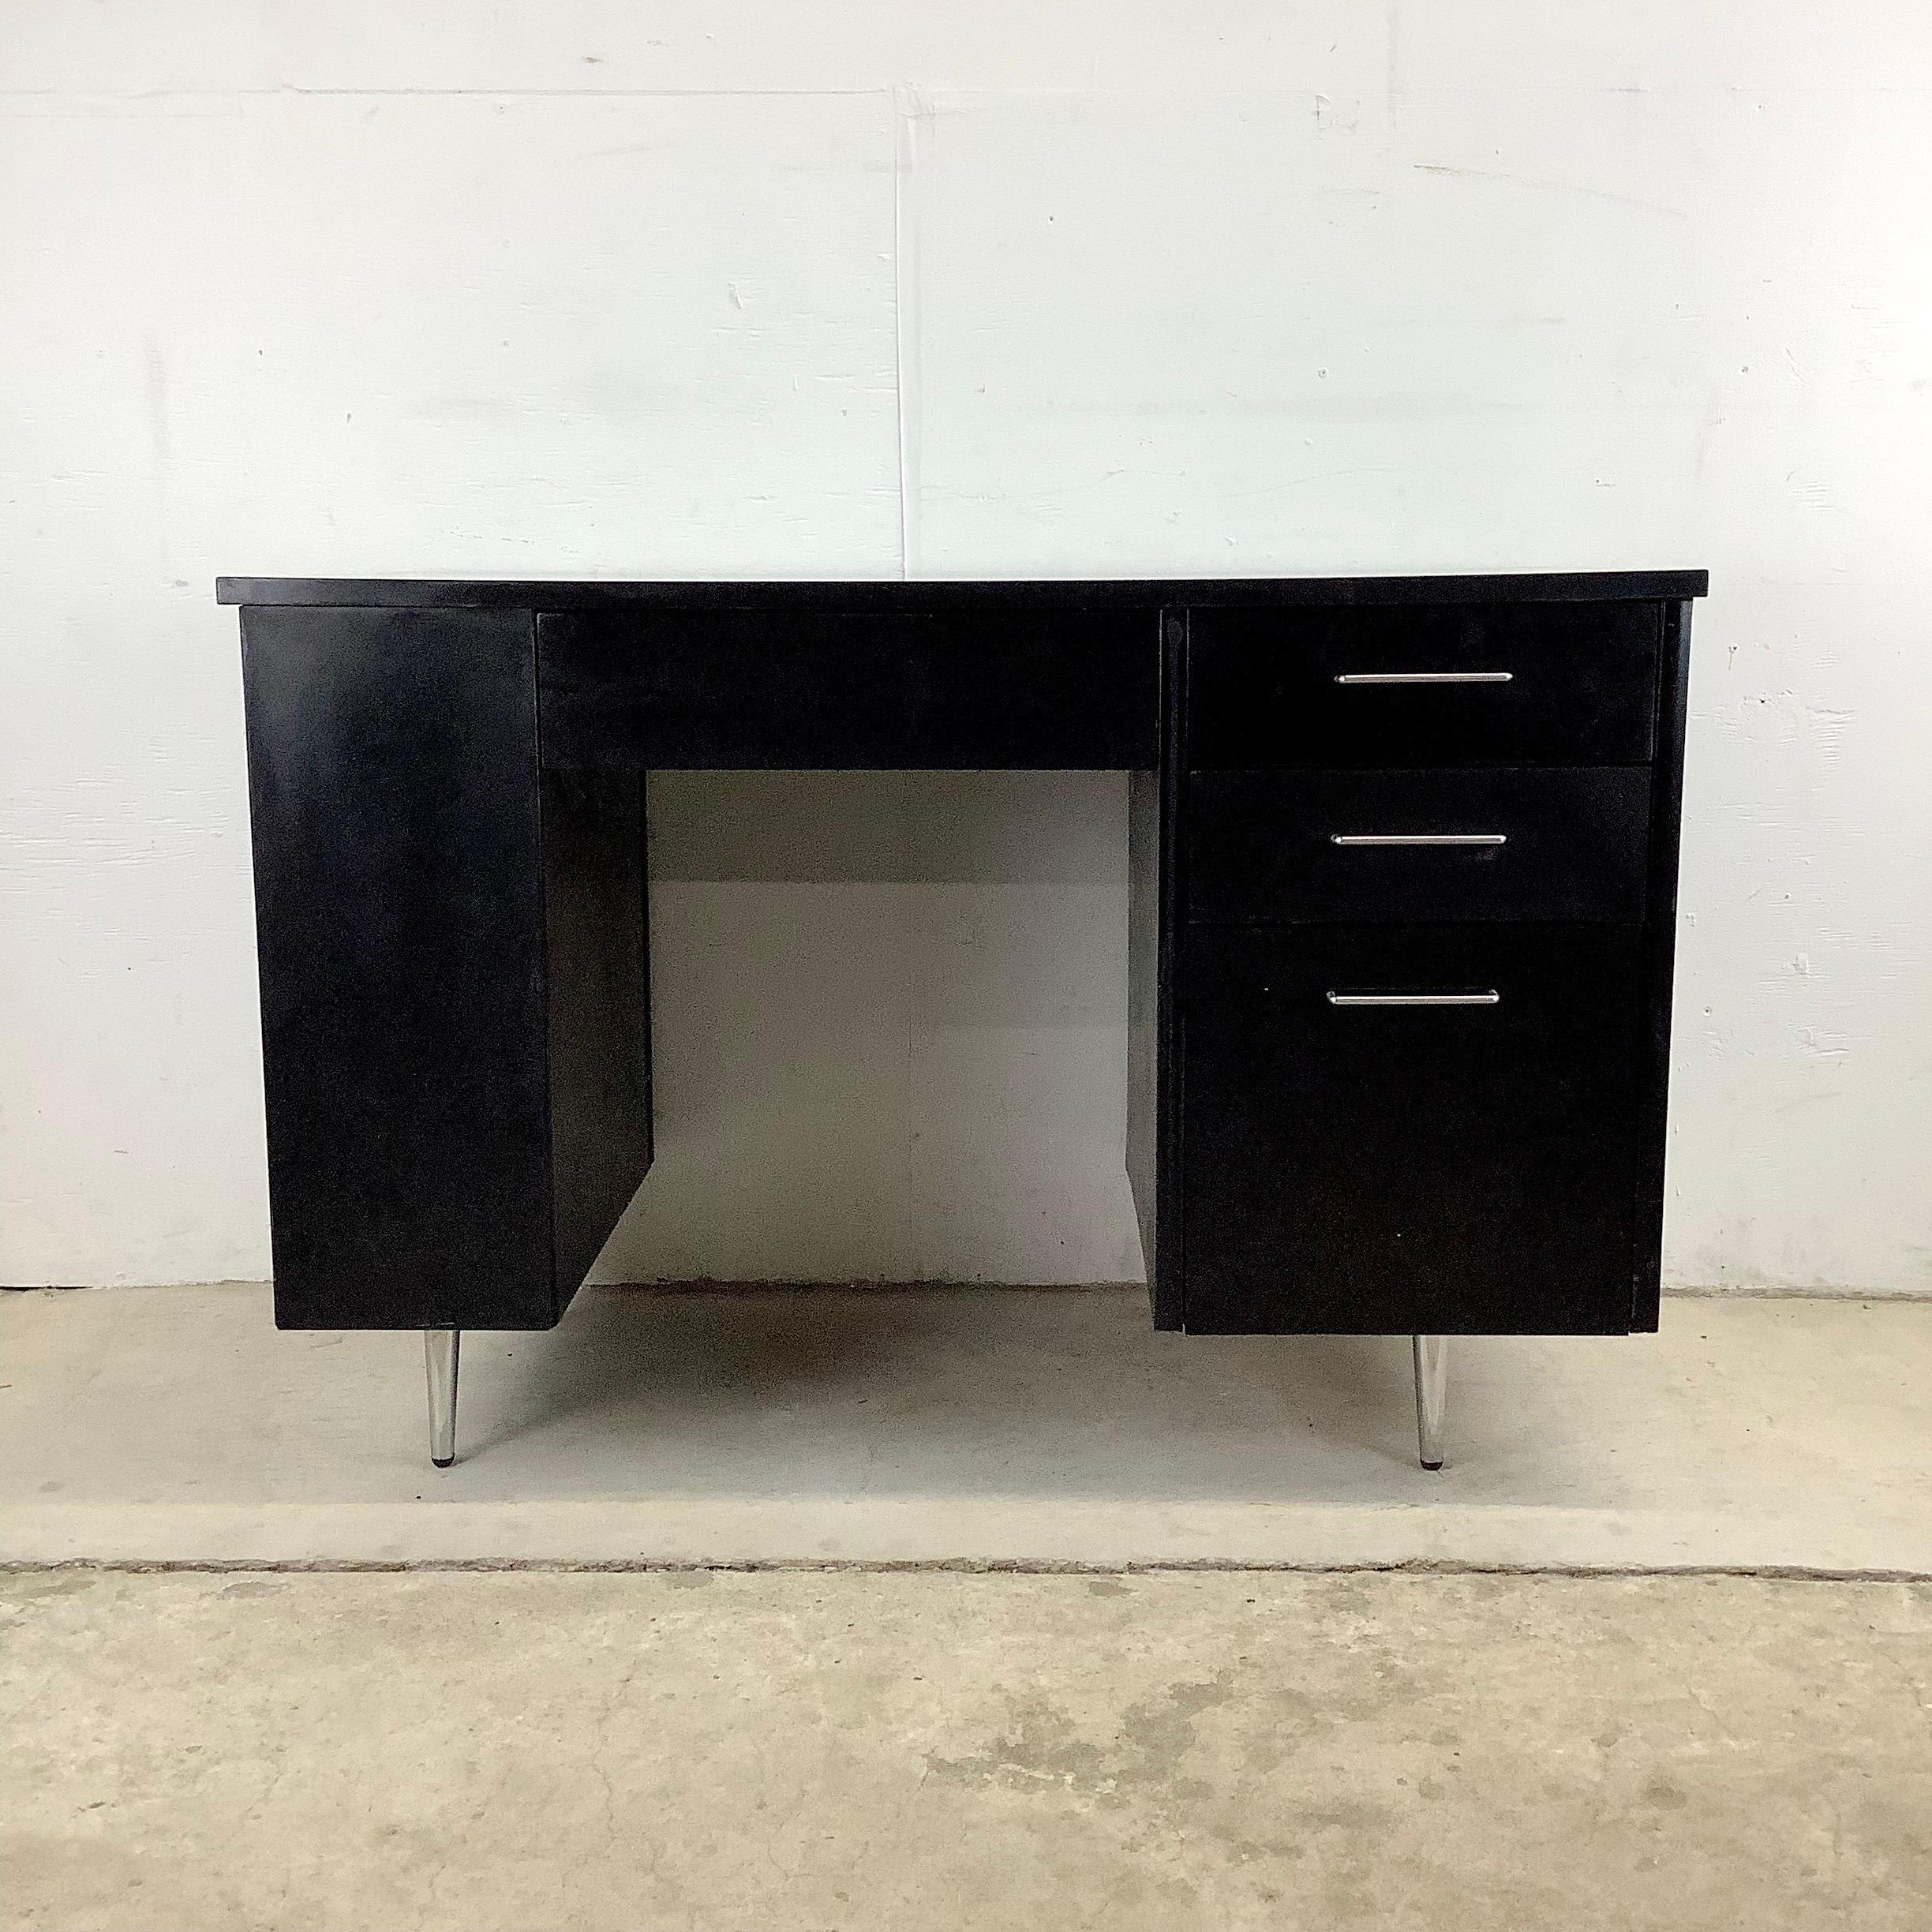 This striking vintage modern writing desk from Thonet Furniture features black lacquer finish and with finished back and bookshelf side it makes a striking addition in any interior setting. Petite sized but featuring plenty of storage the clean